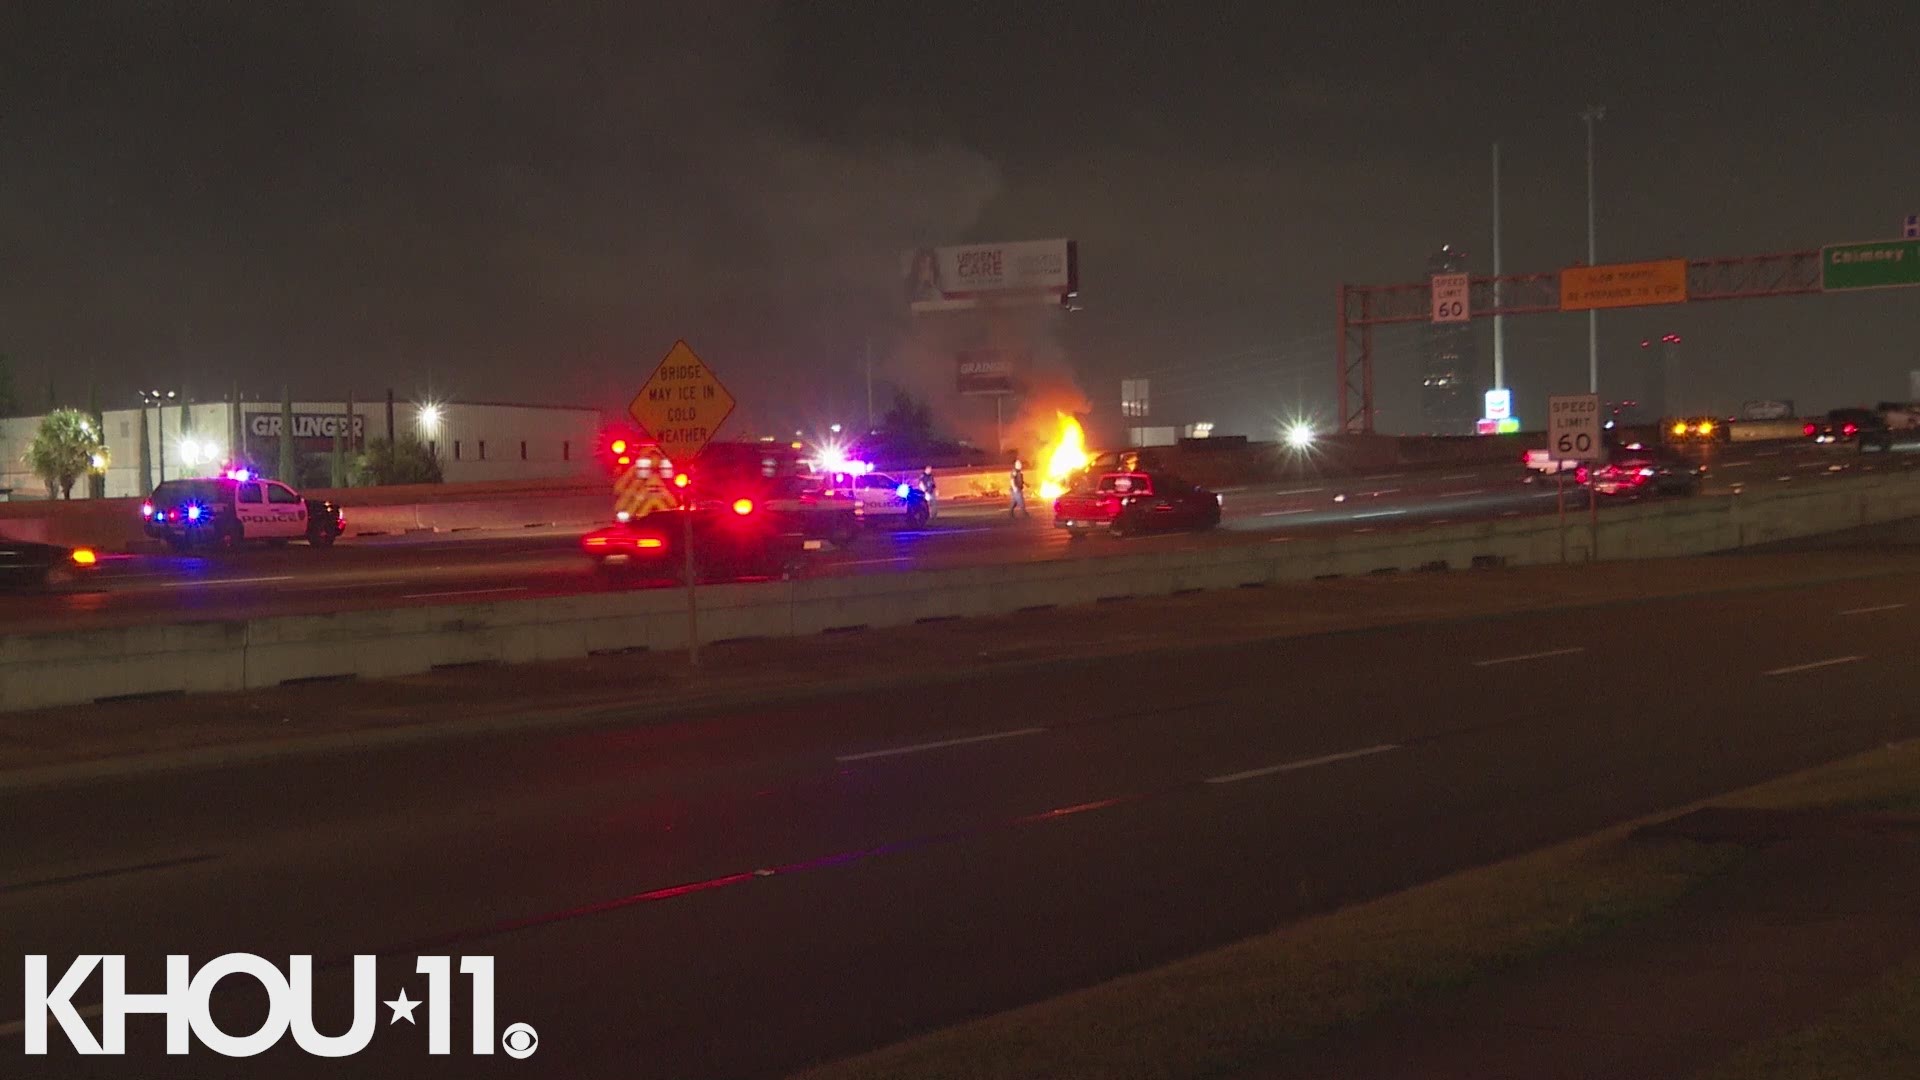 At least one person was injured in a fiery crash on the Southwest Freeway near Chimney Rock. Police said at least three cars were involved in the crash.